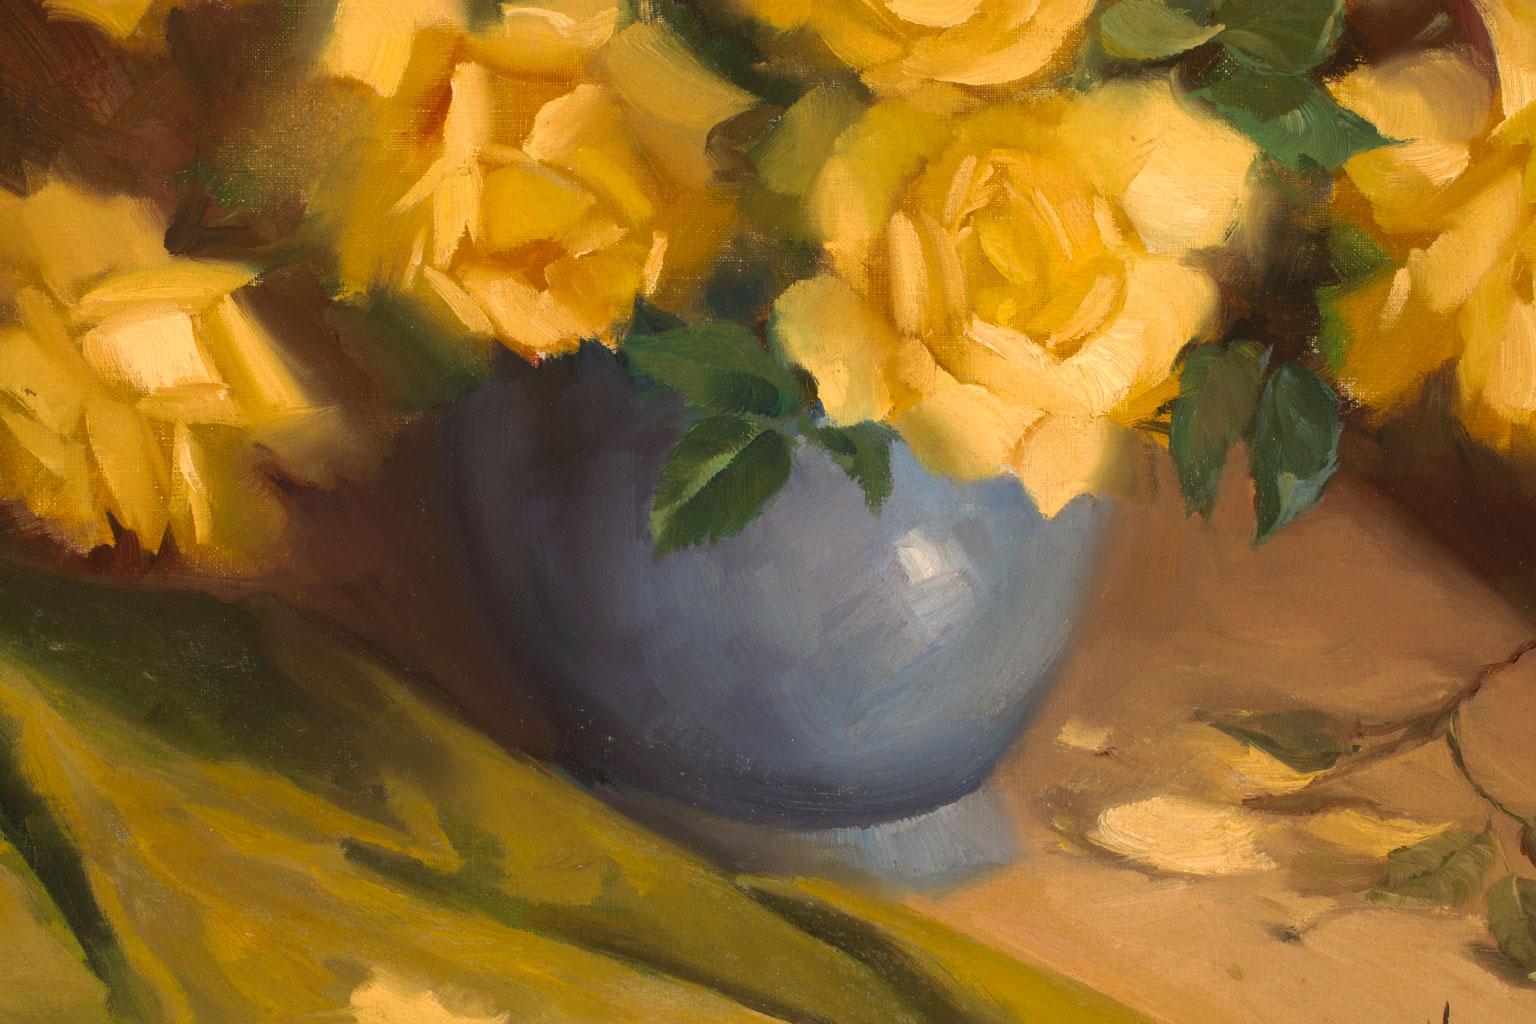 [Yellow Roses] Floral Still Life Oil Painting on Canvas by Vernon Kerr, Framed 2